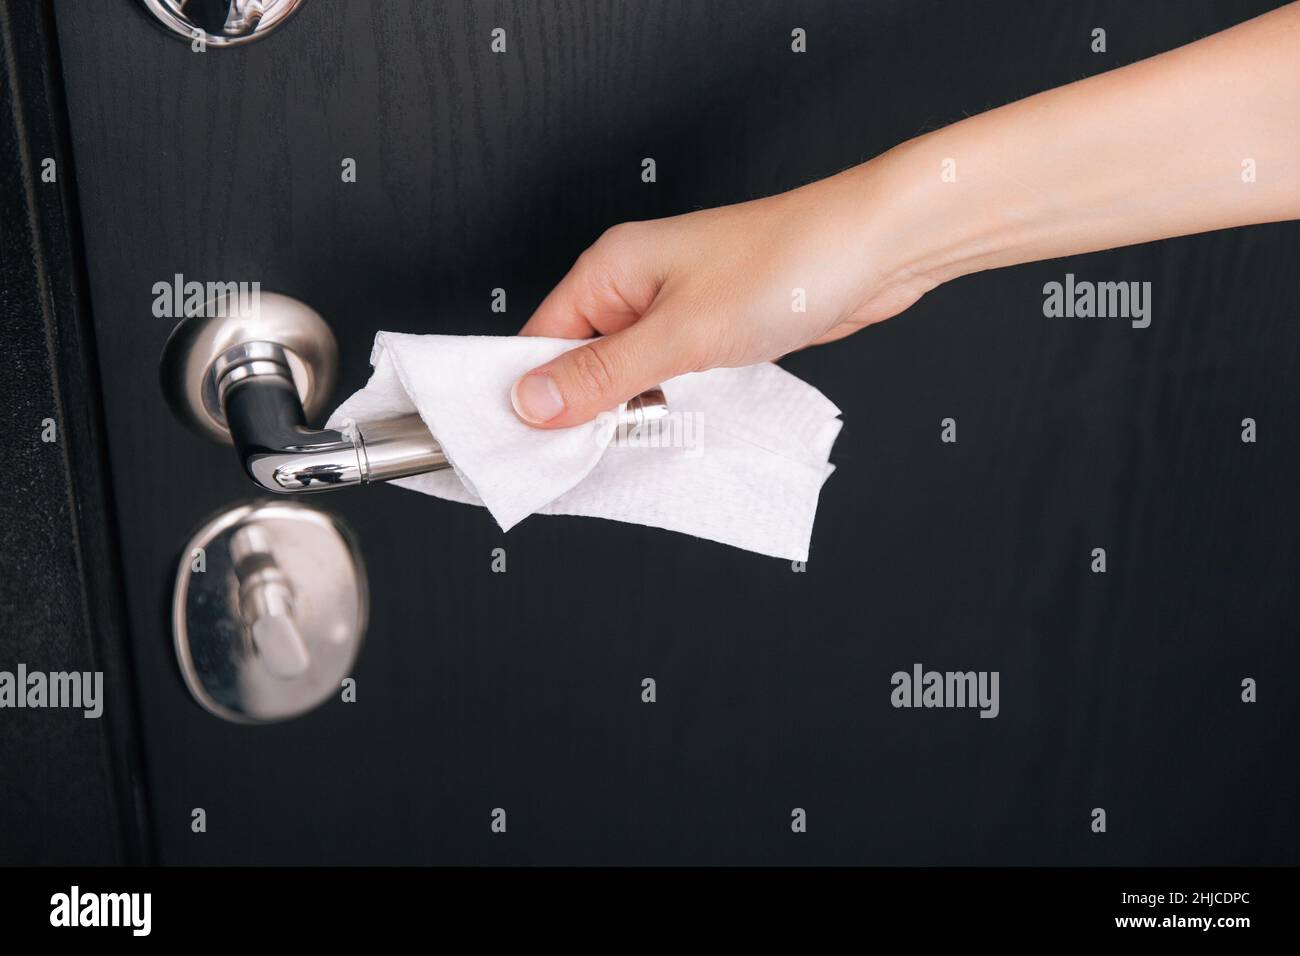 Cleaning black door handles with an antiseptic wet wipe. Woman hand using towel for cleaning home room door link. Sanitize surfaces prevention in Stock Photo